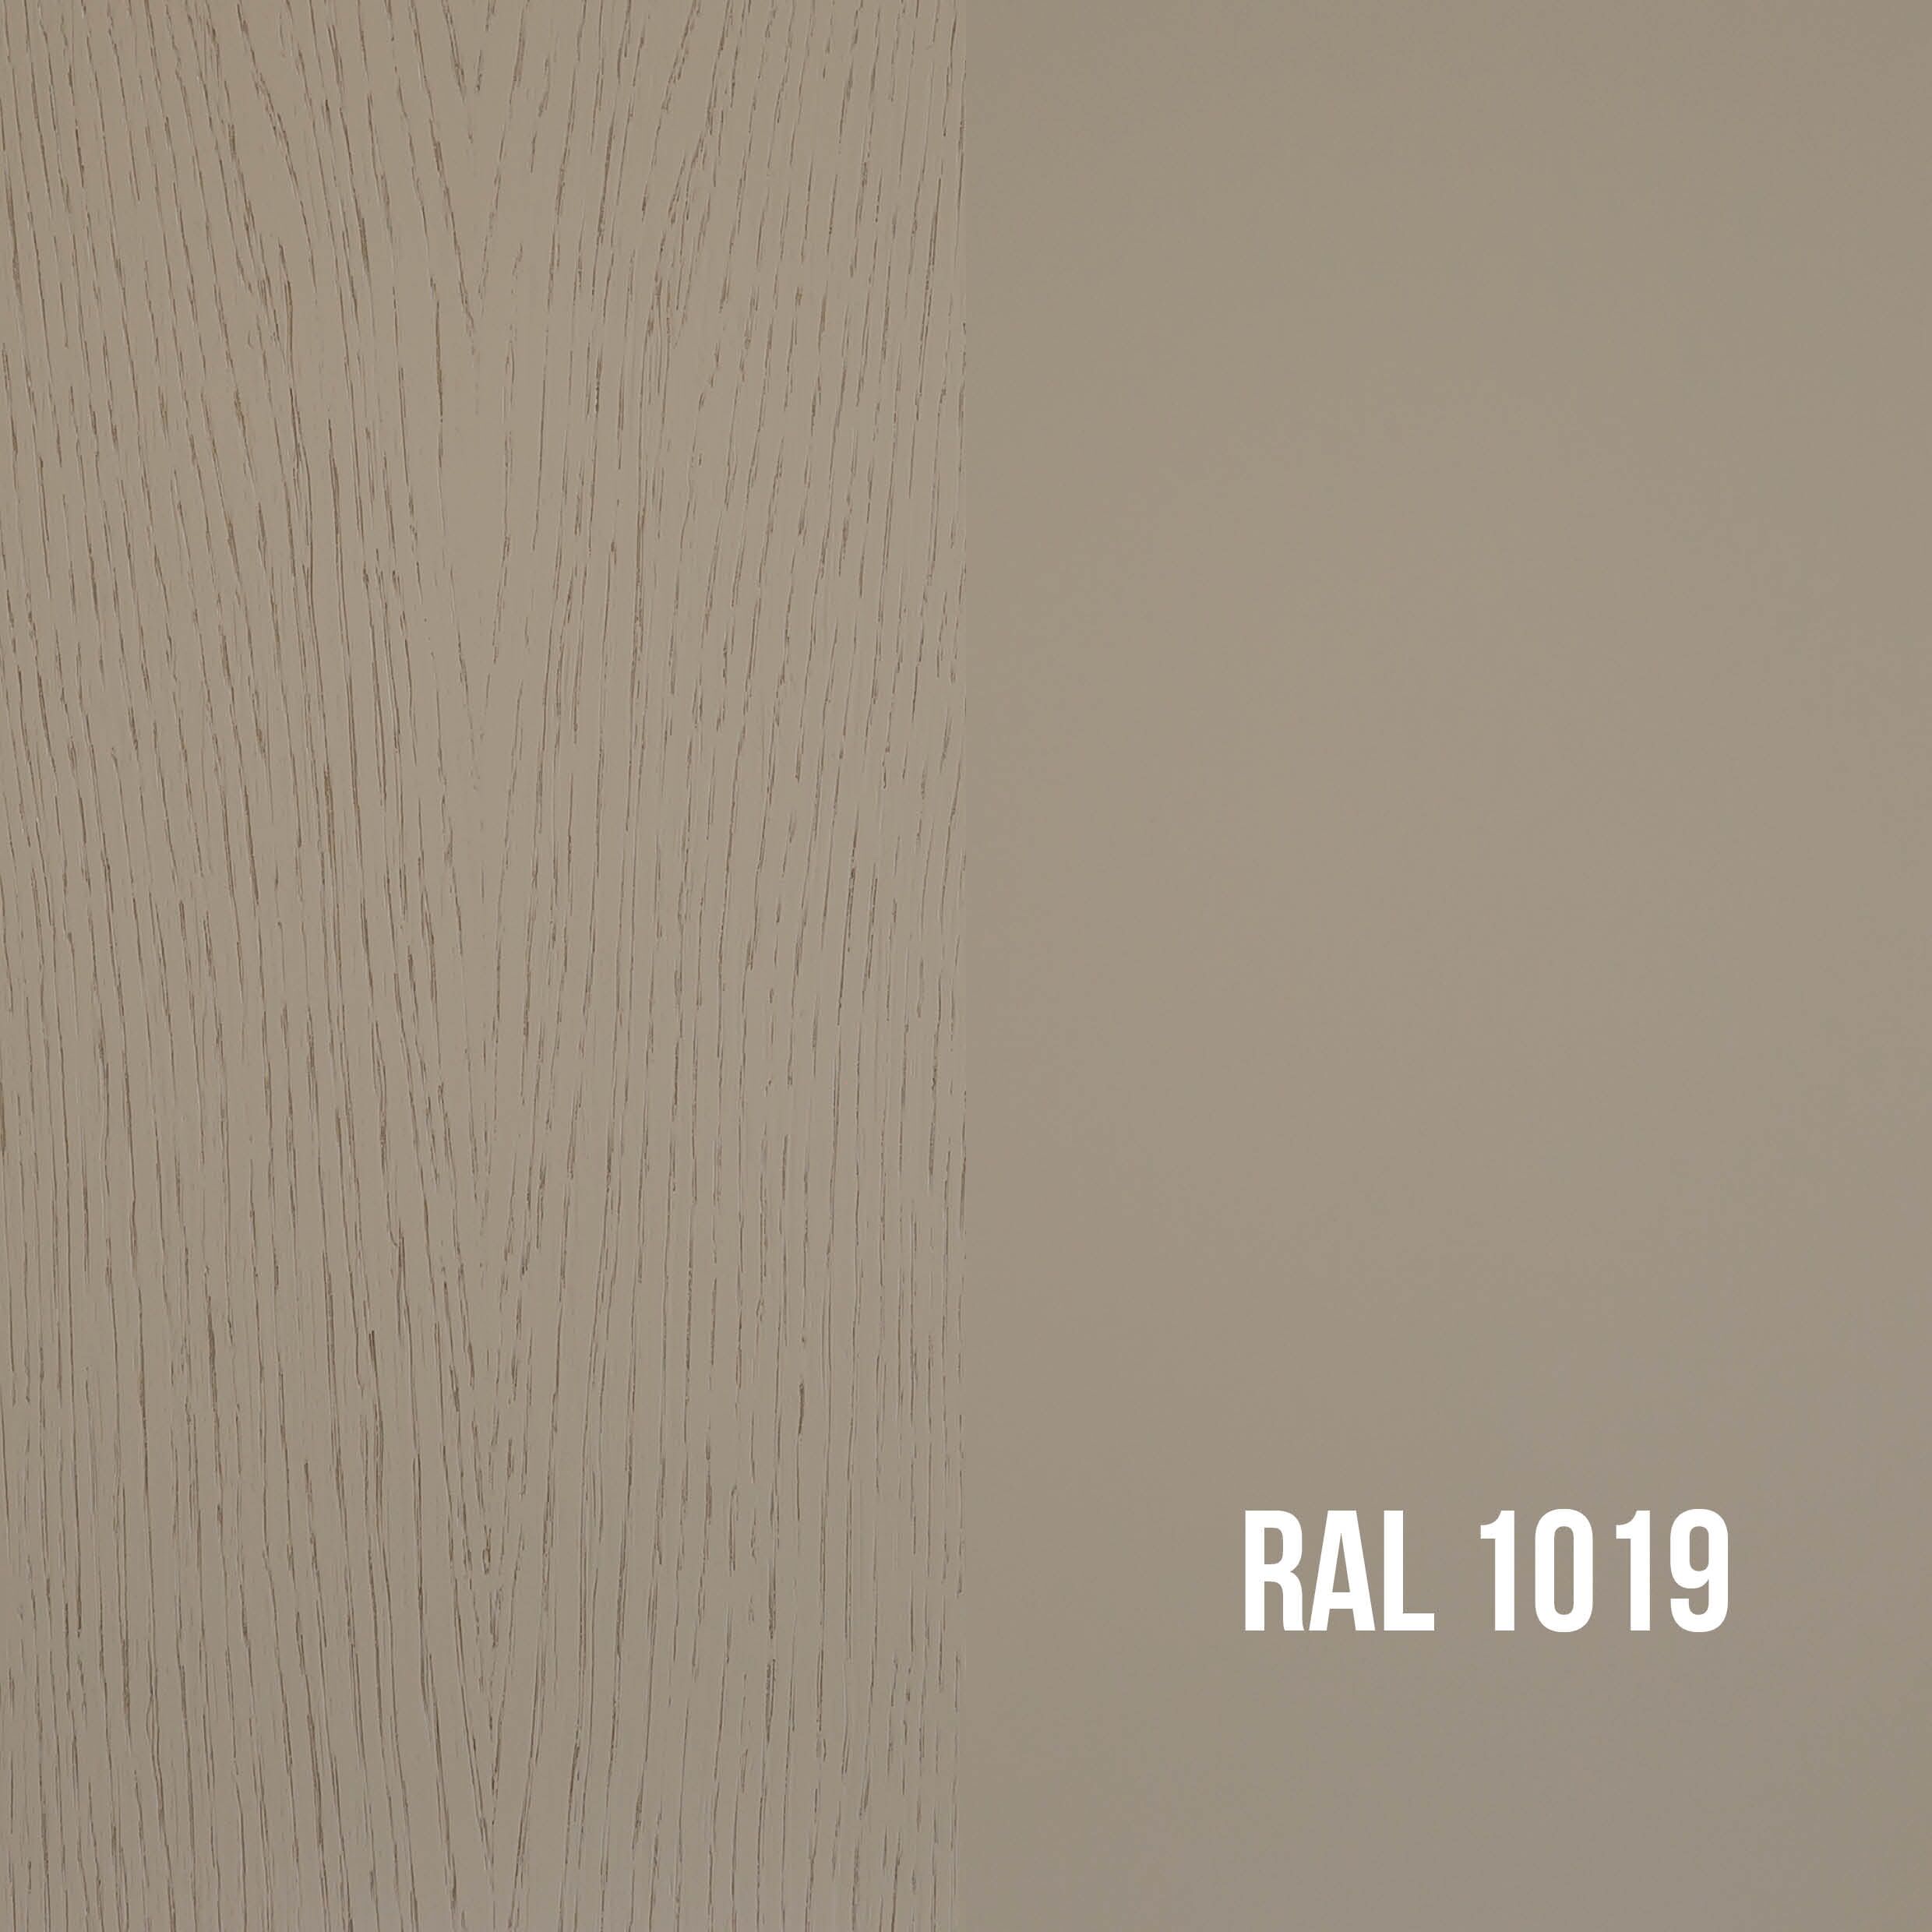 RAL 1019